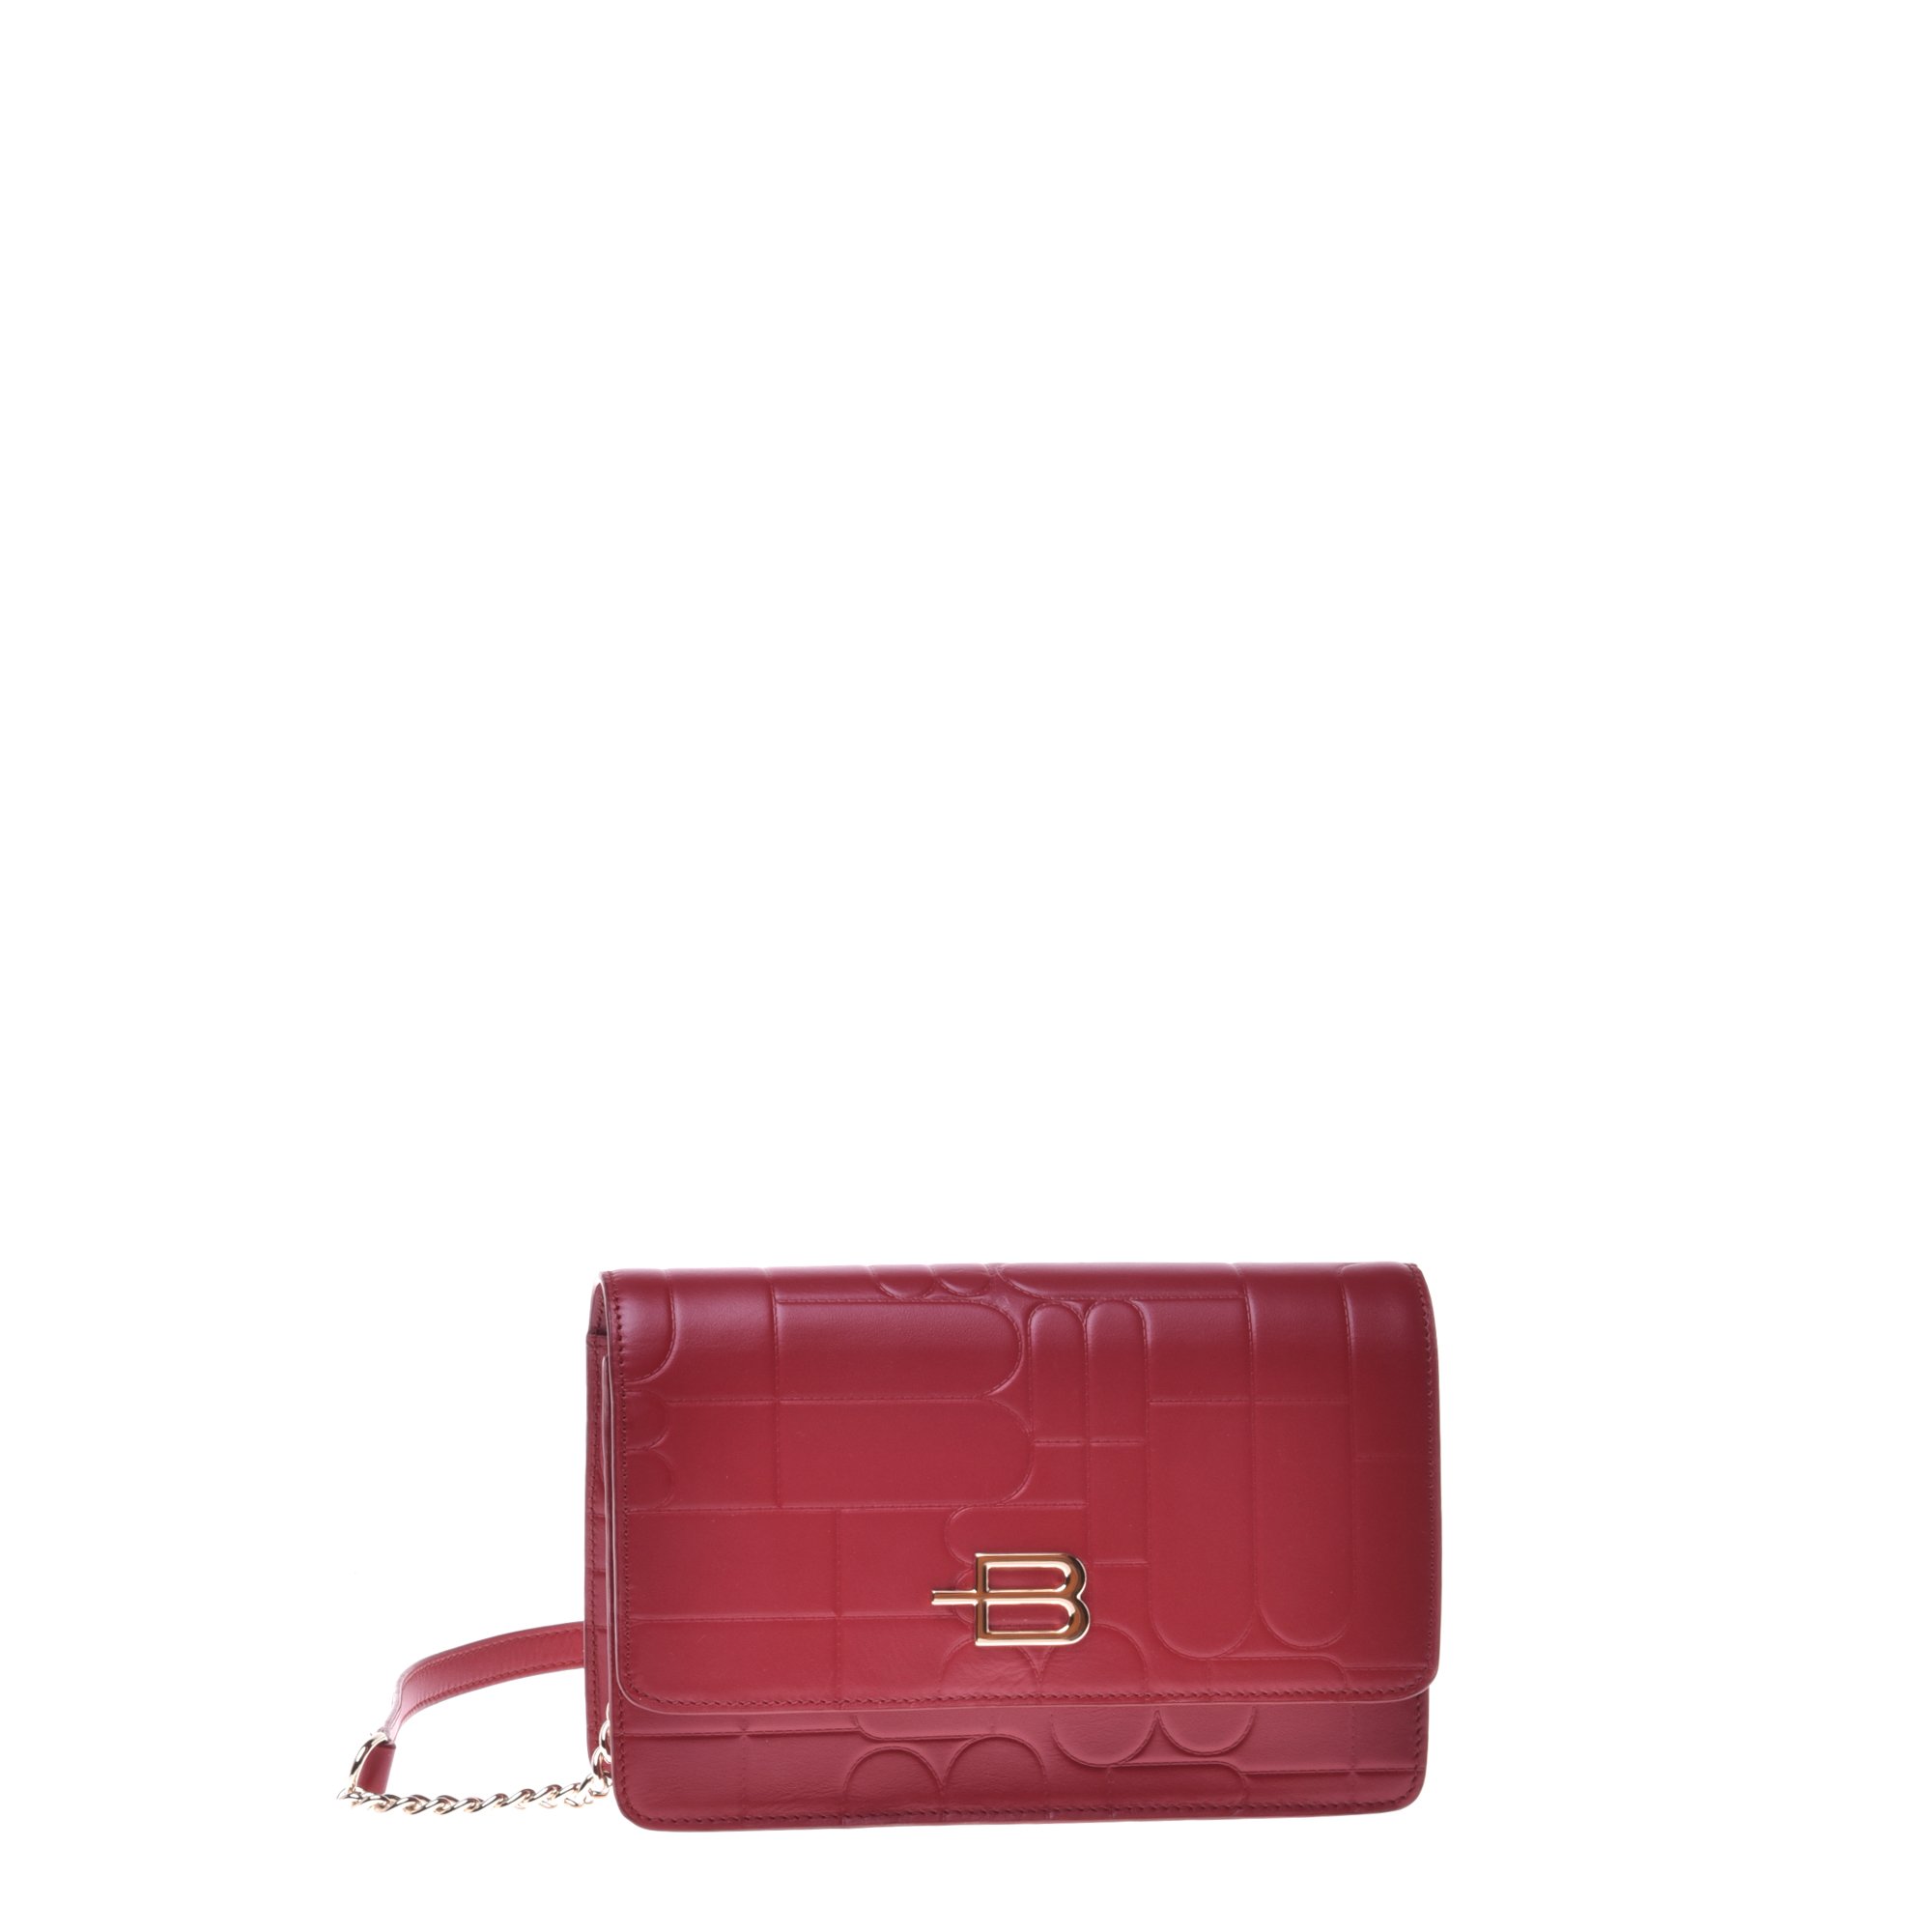 Red leather wallet with crossbody strap image